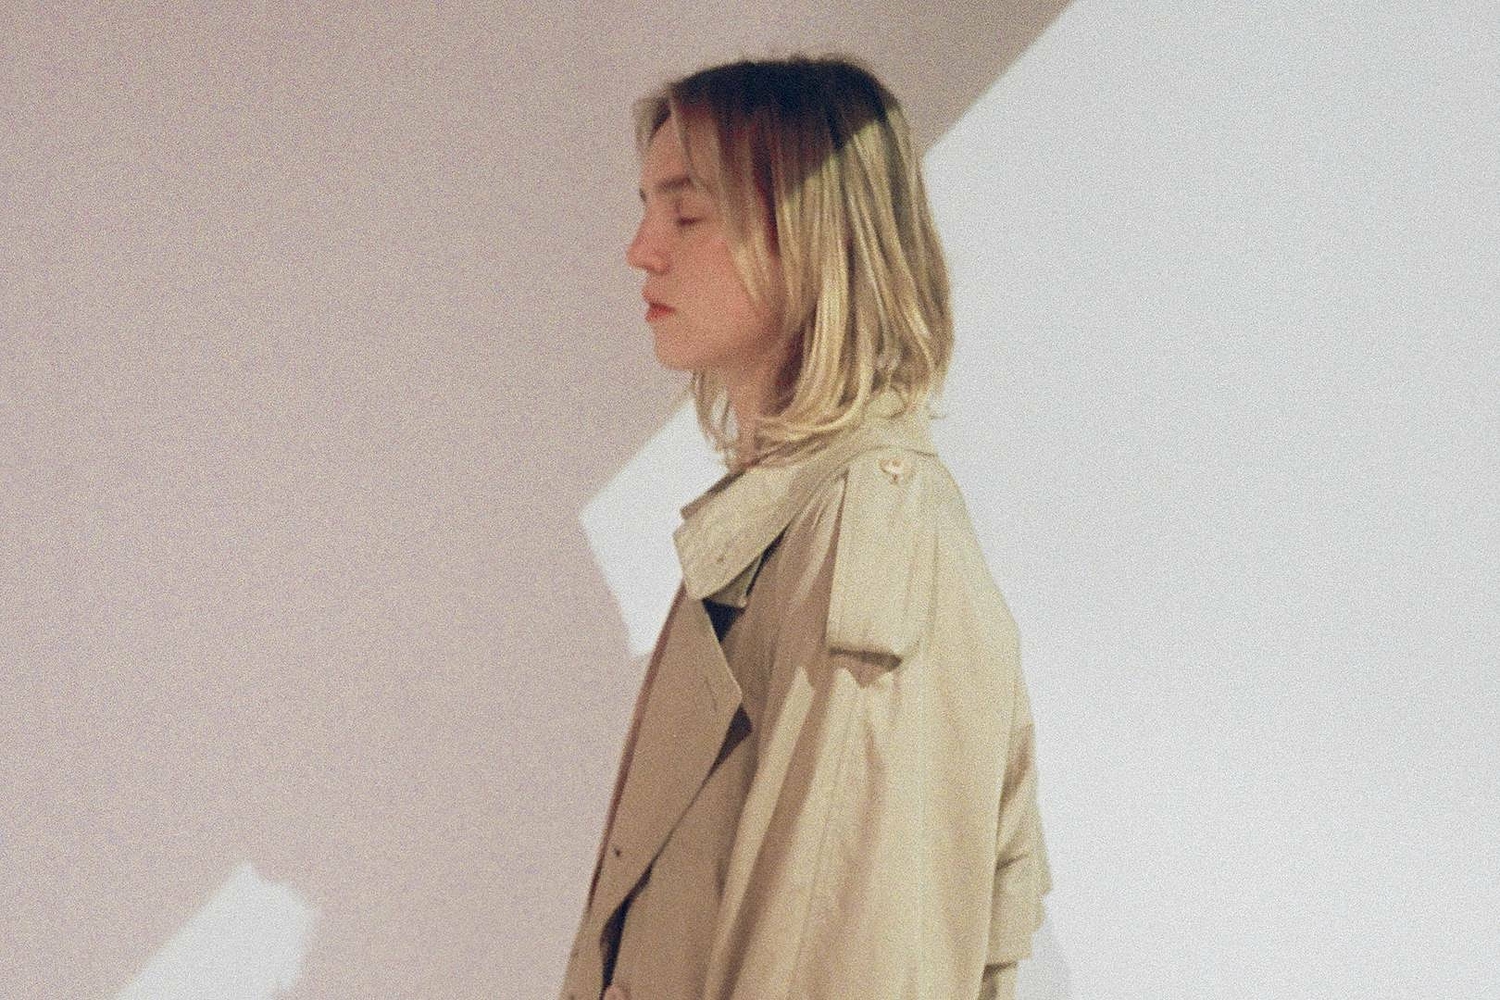 The Japanese House announces new album ‘In the End It Always Does’